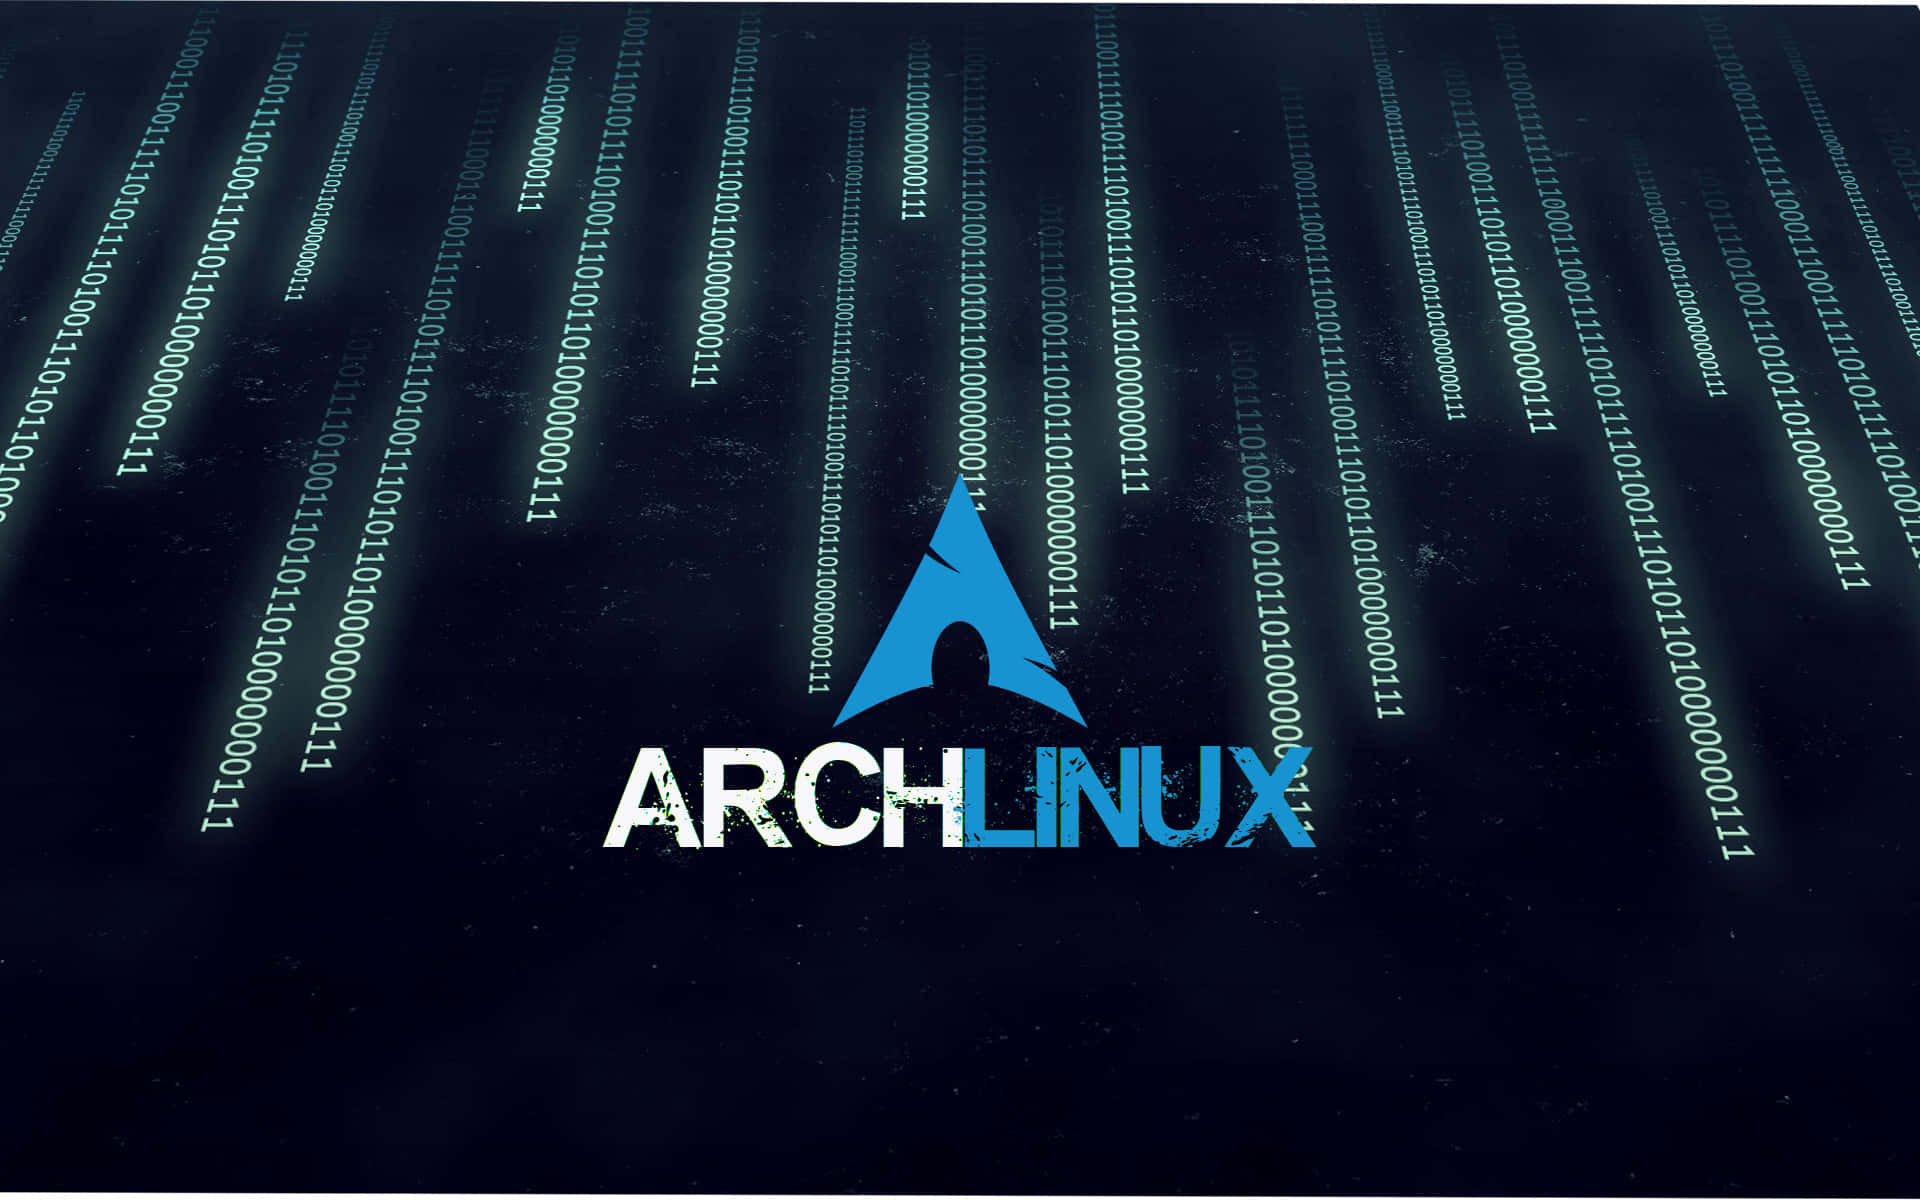 Arch Linux Powered Workspace Environment Wallpaper